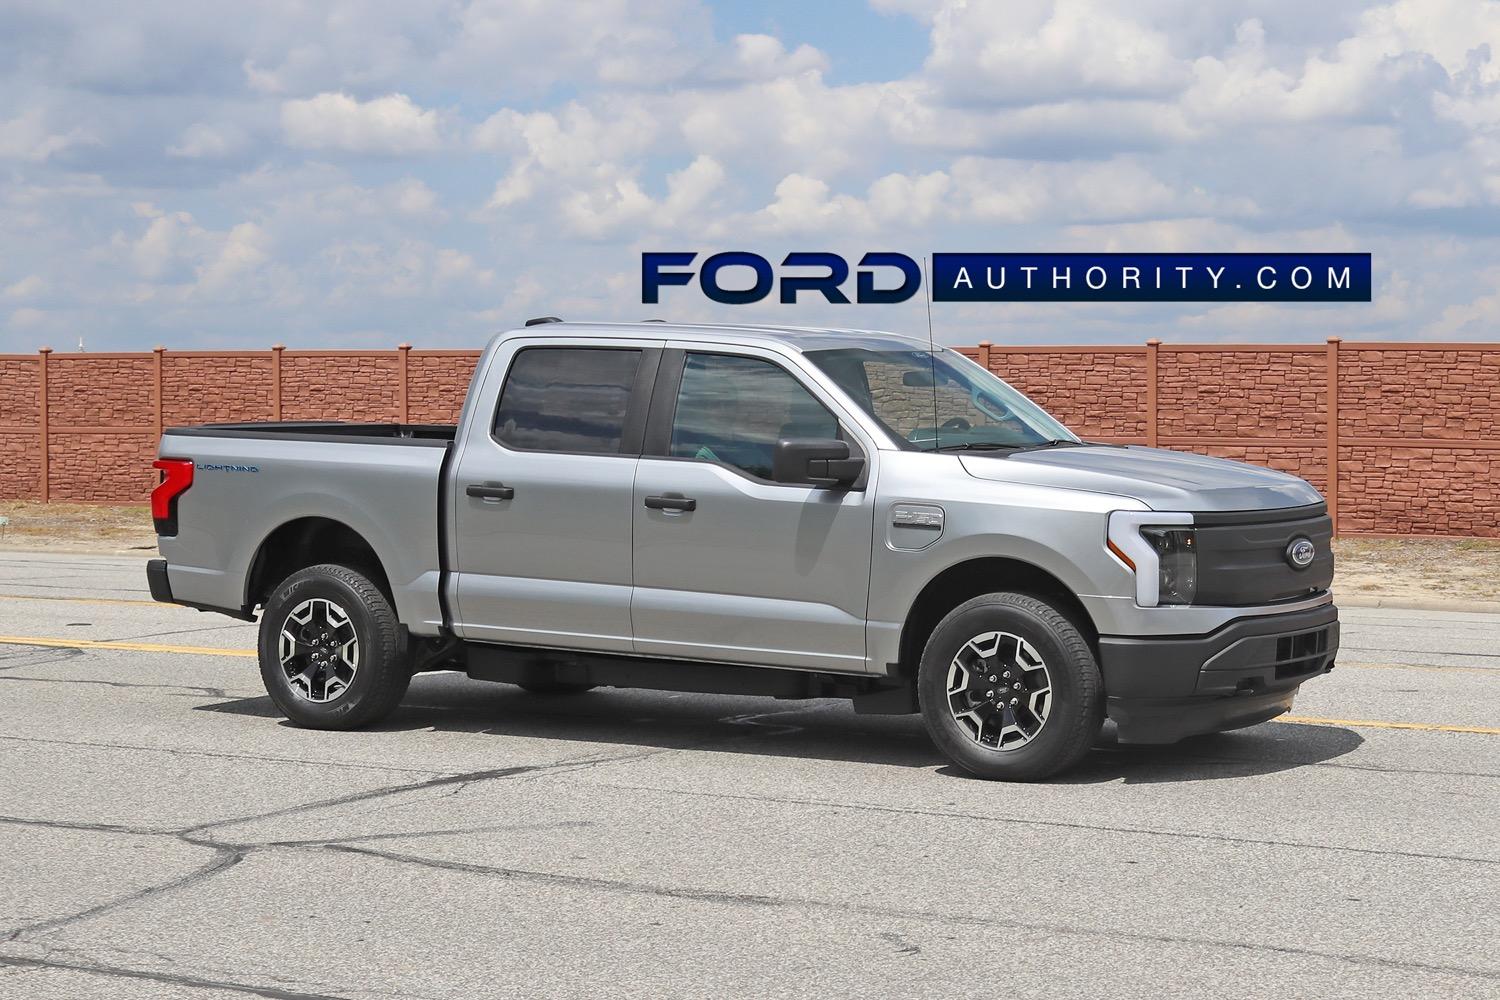 Ford F-150 Lightning ICONIC SILVER F-150 Lightning Photos & Club 2022-Ford-F-150-Lightning-Pro-Iconic-Silver-Real-World-Pictures-Exterior-003